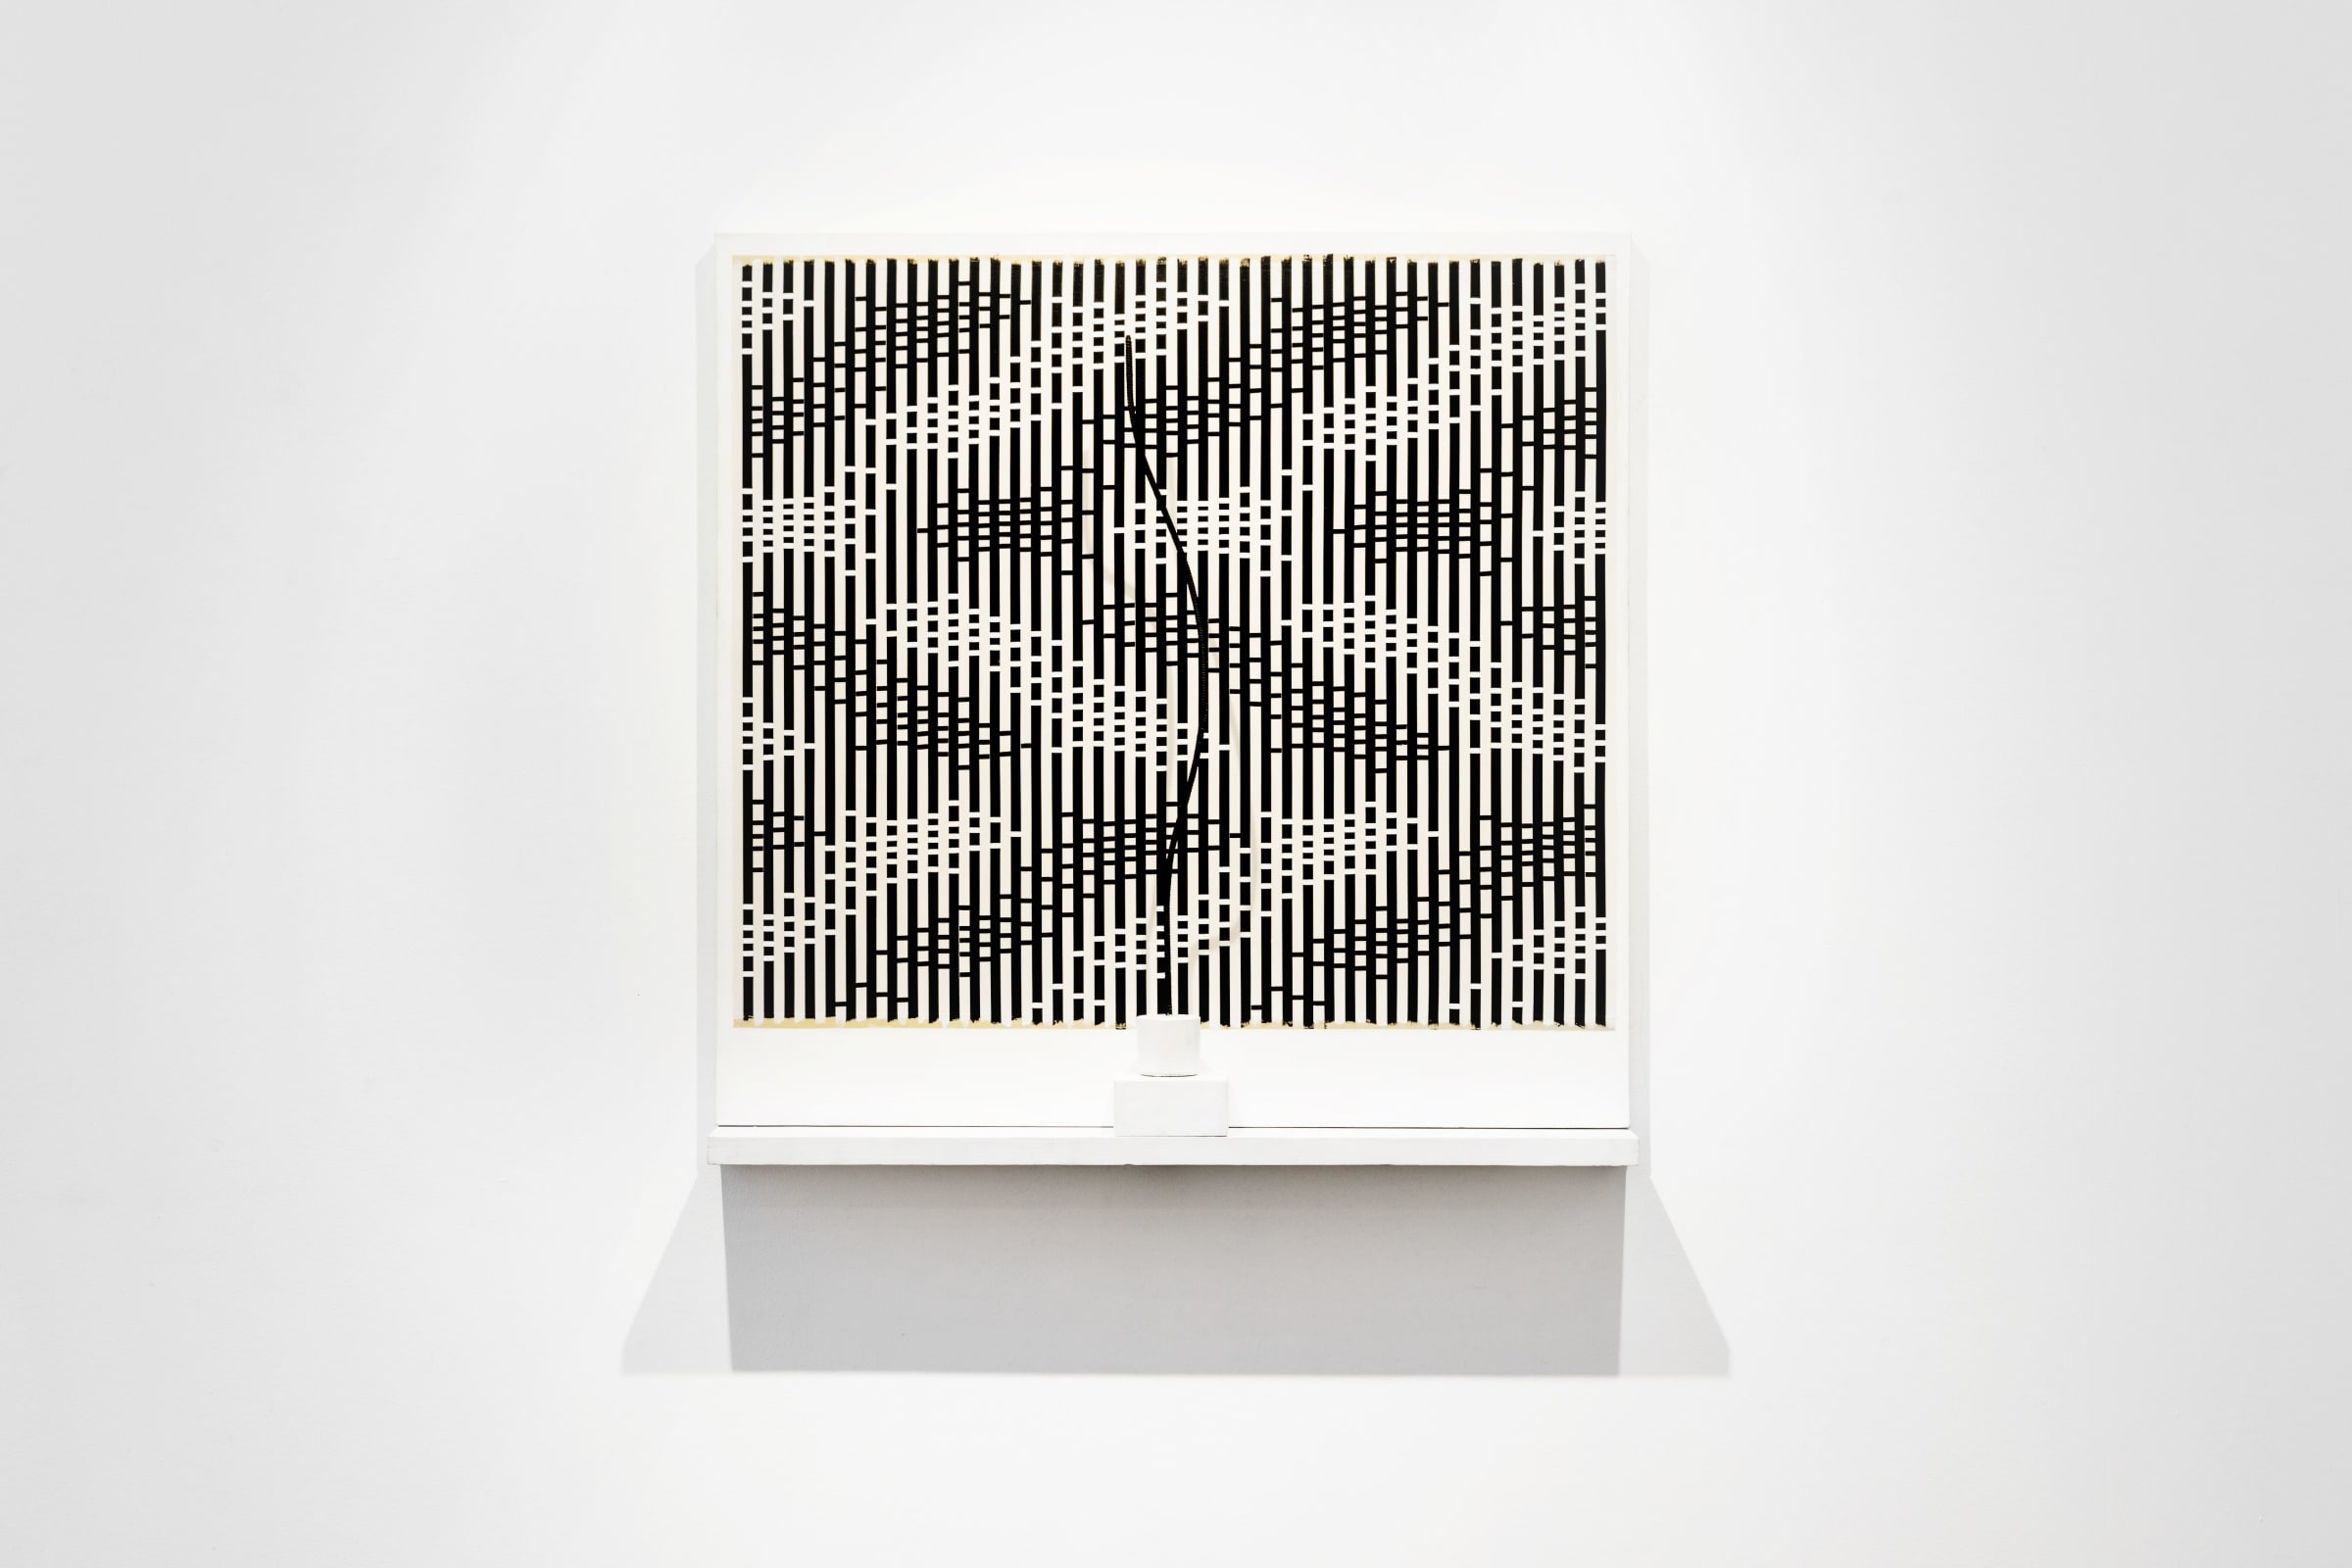 Michael Kidner In Black and White